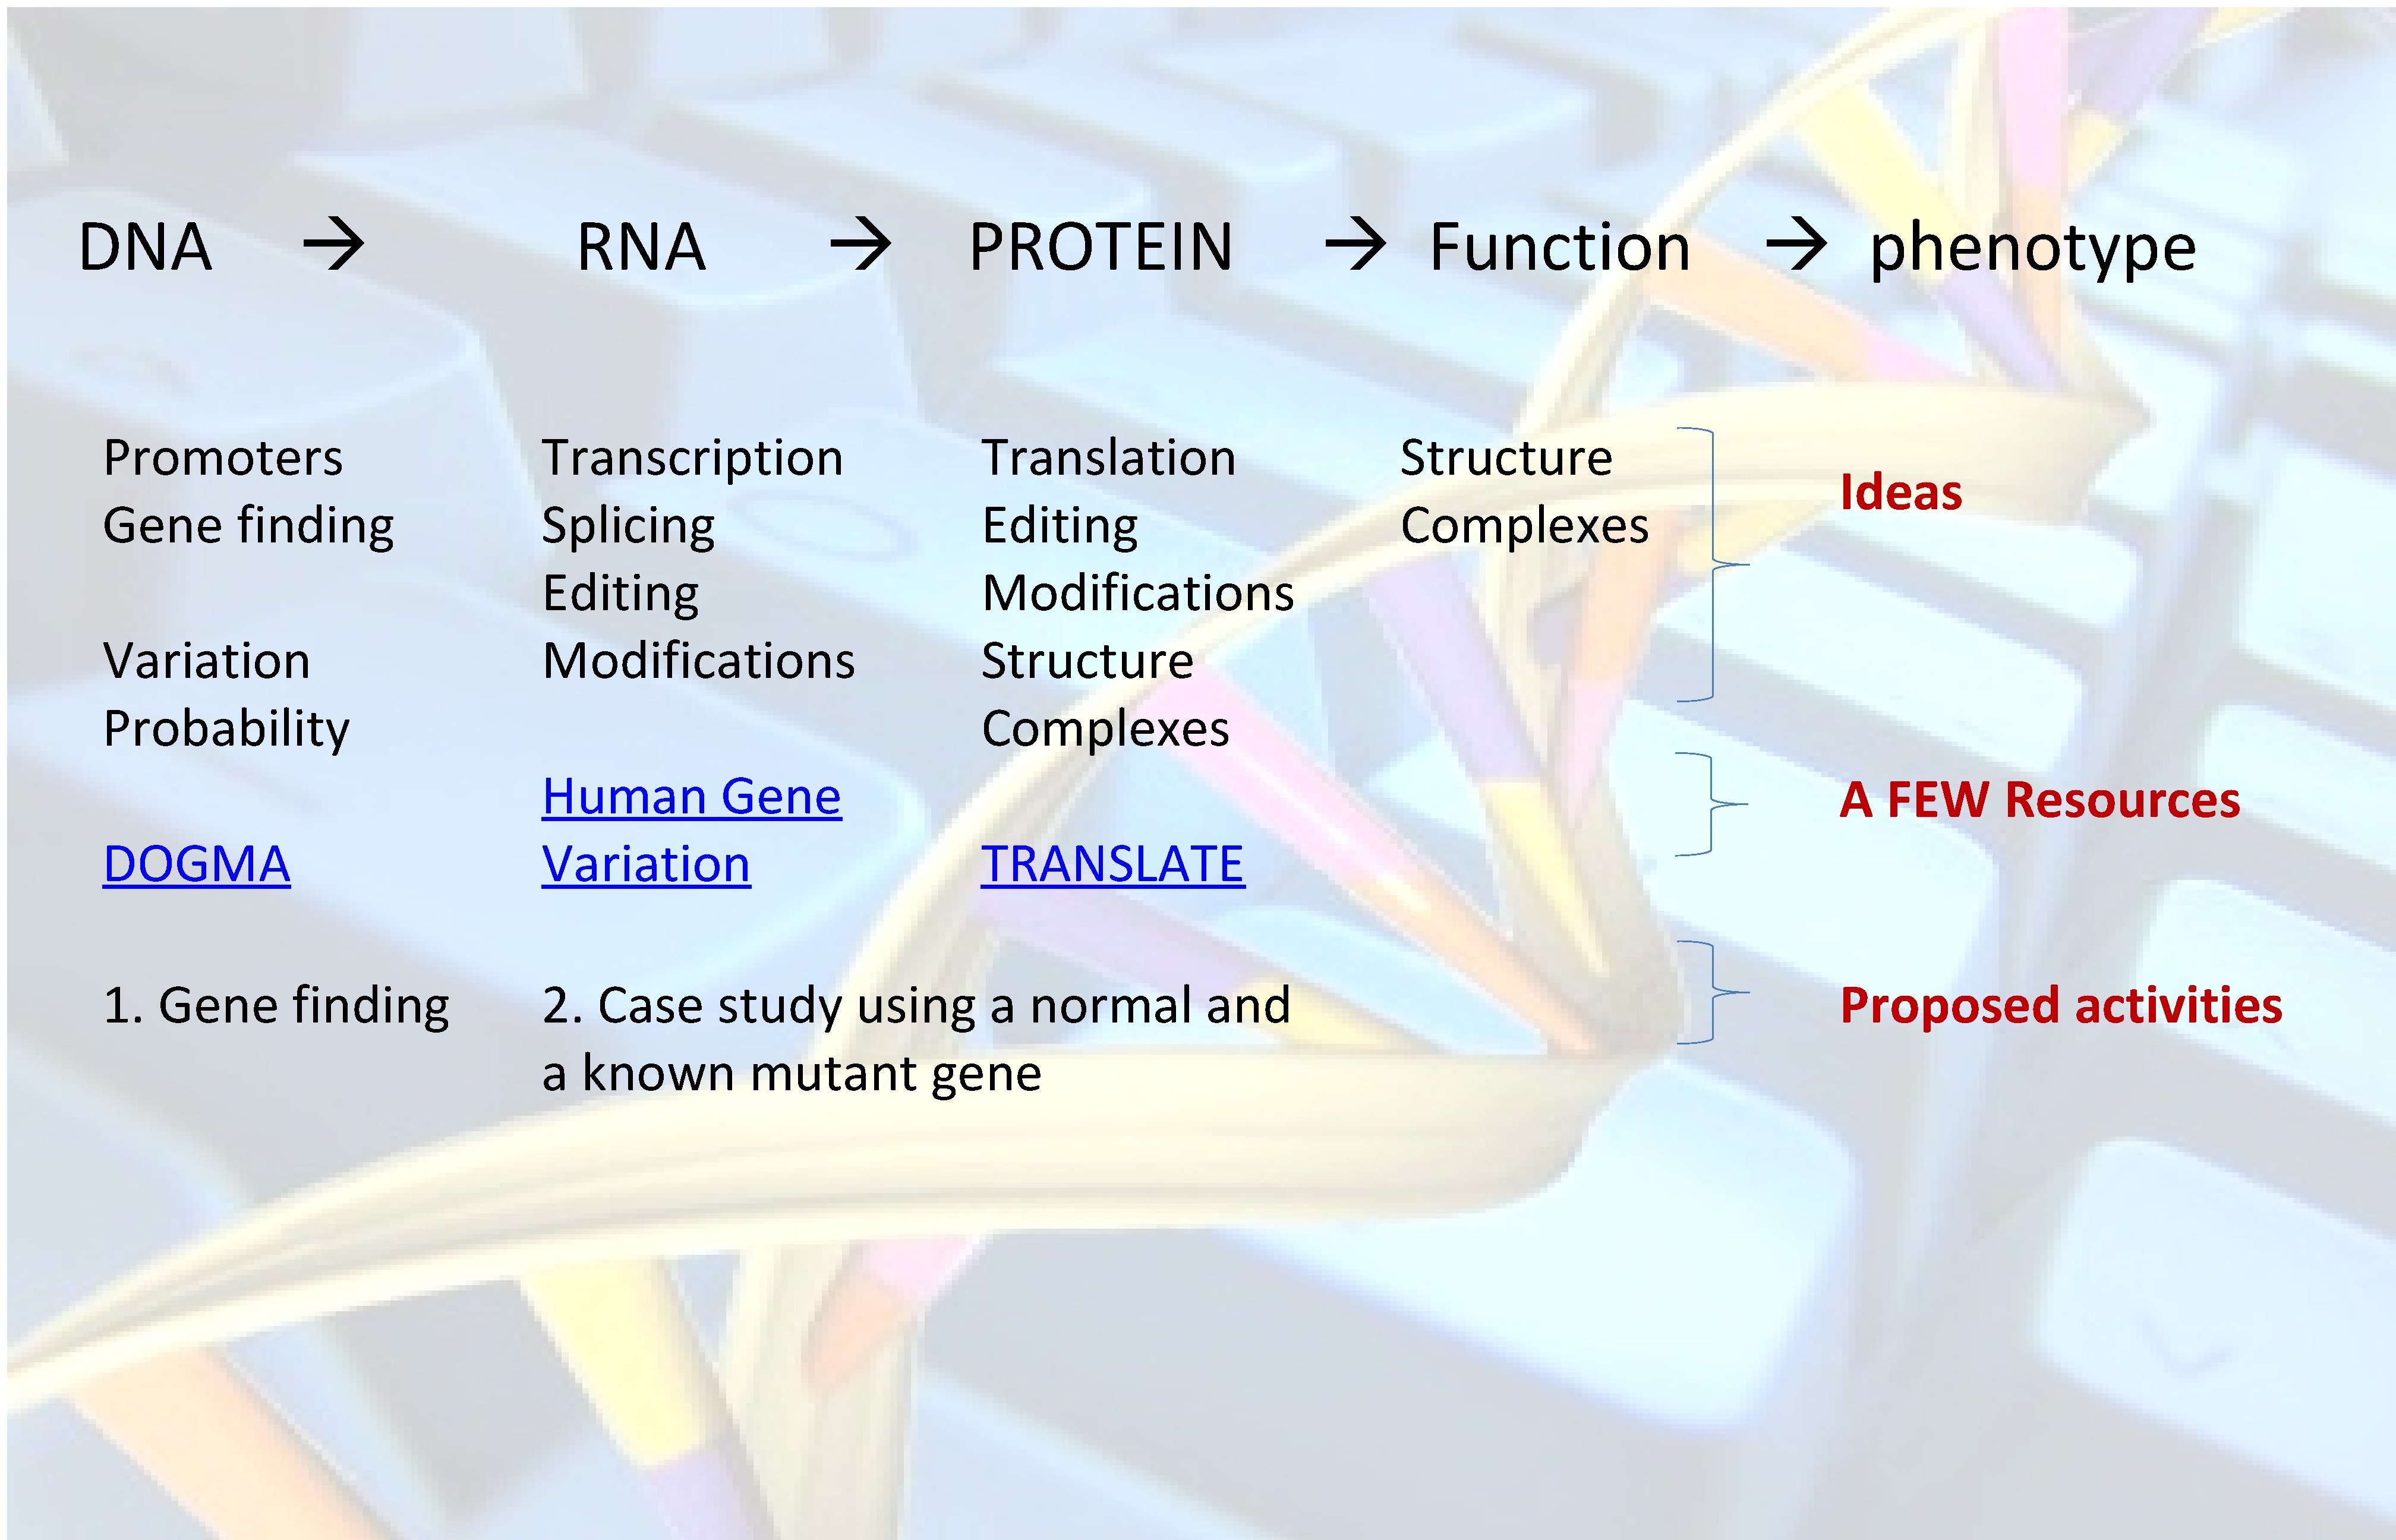 DNA Promoters Gene finding Variation Probability DOGMA 1. Gene finding RNA PROTEIN Transcription Splicing